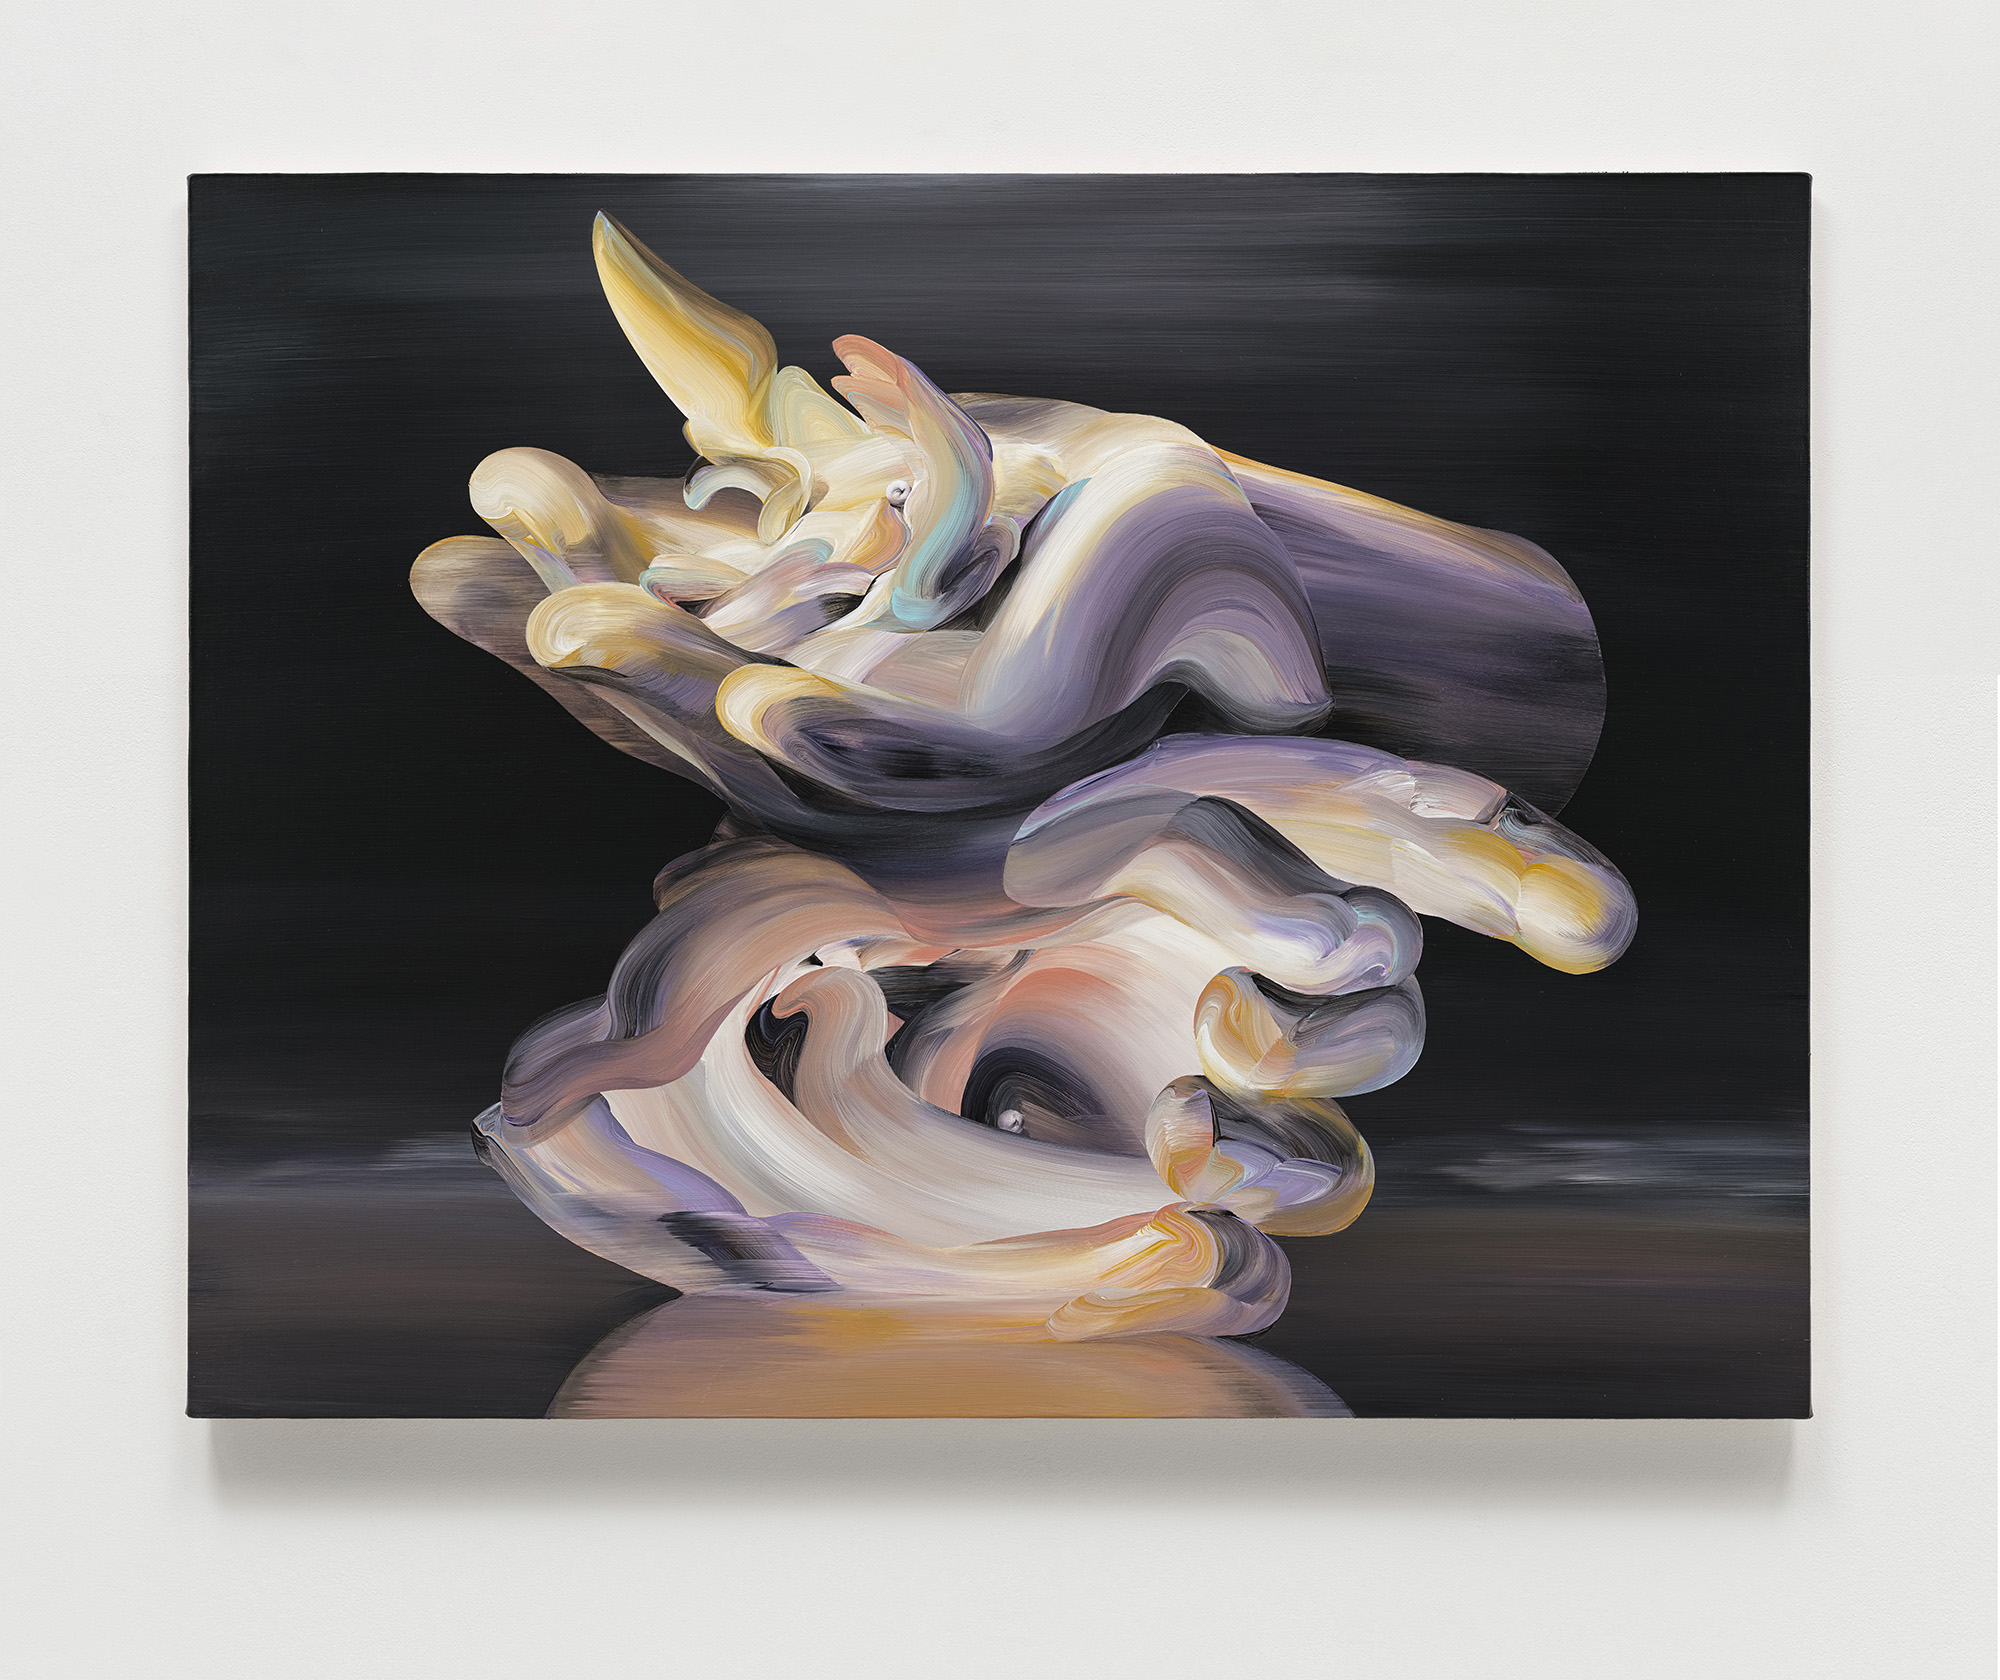 Huang Ko Wei, Layer, 2022, acrylic on canvas, 50 x 65 cm